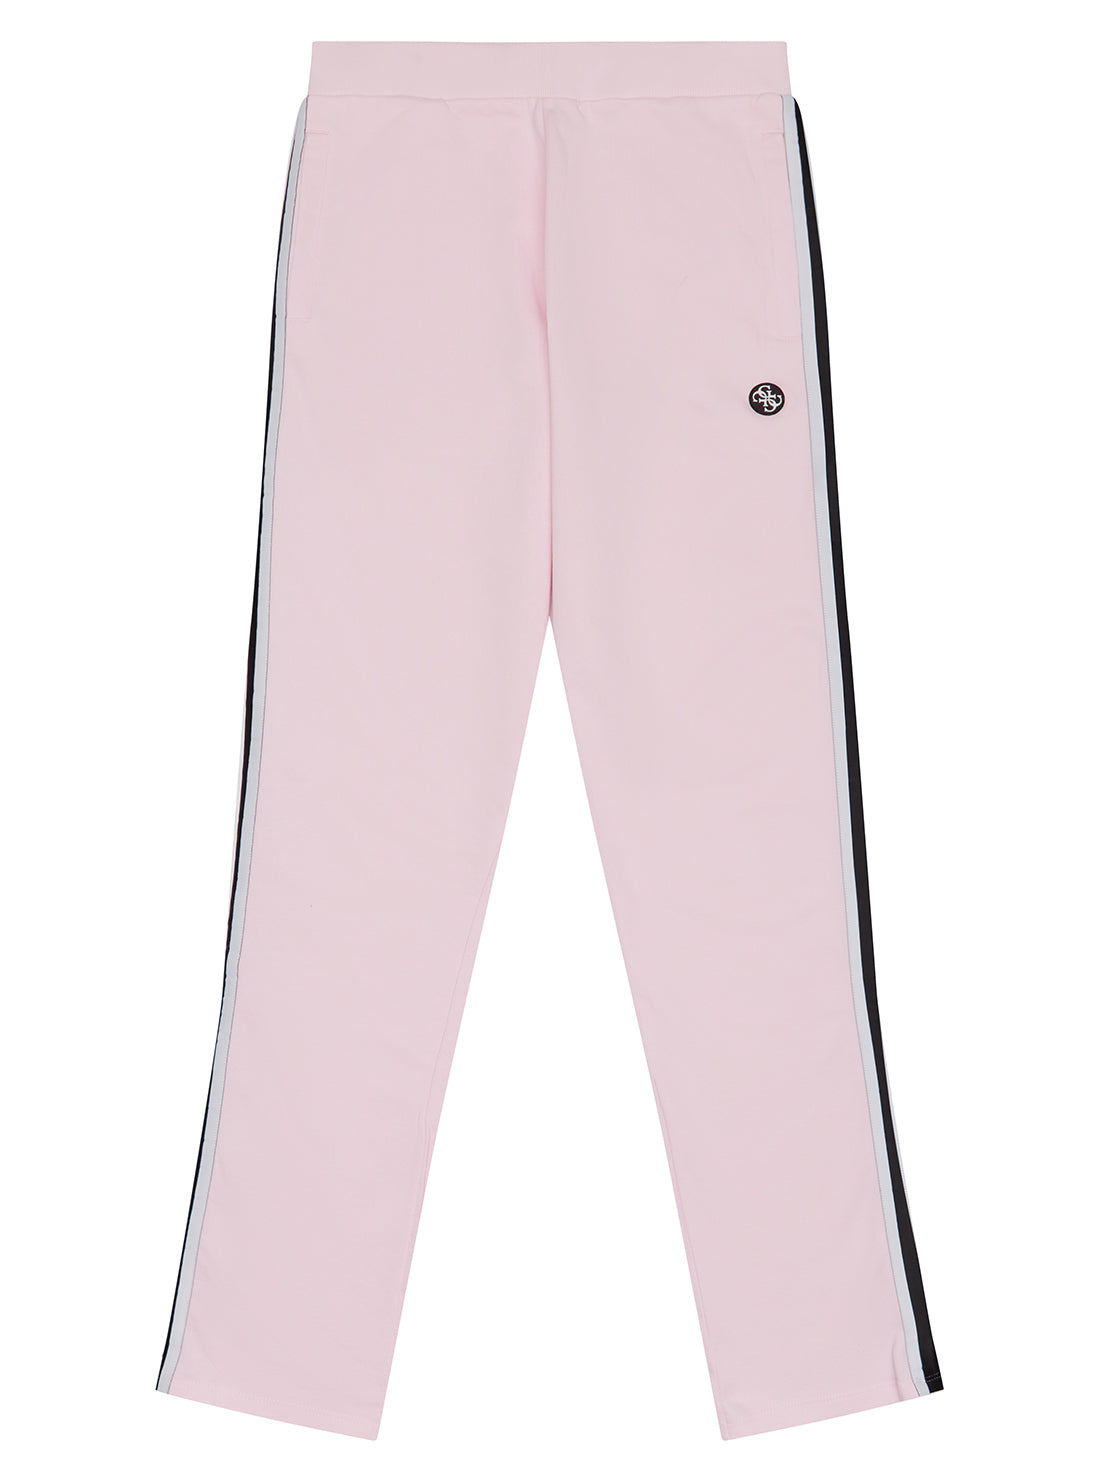 GUESS Pink Active Pants (7-16) front view